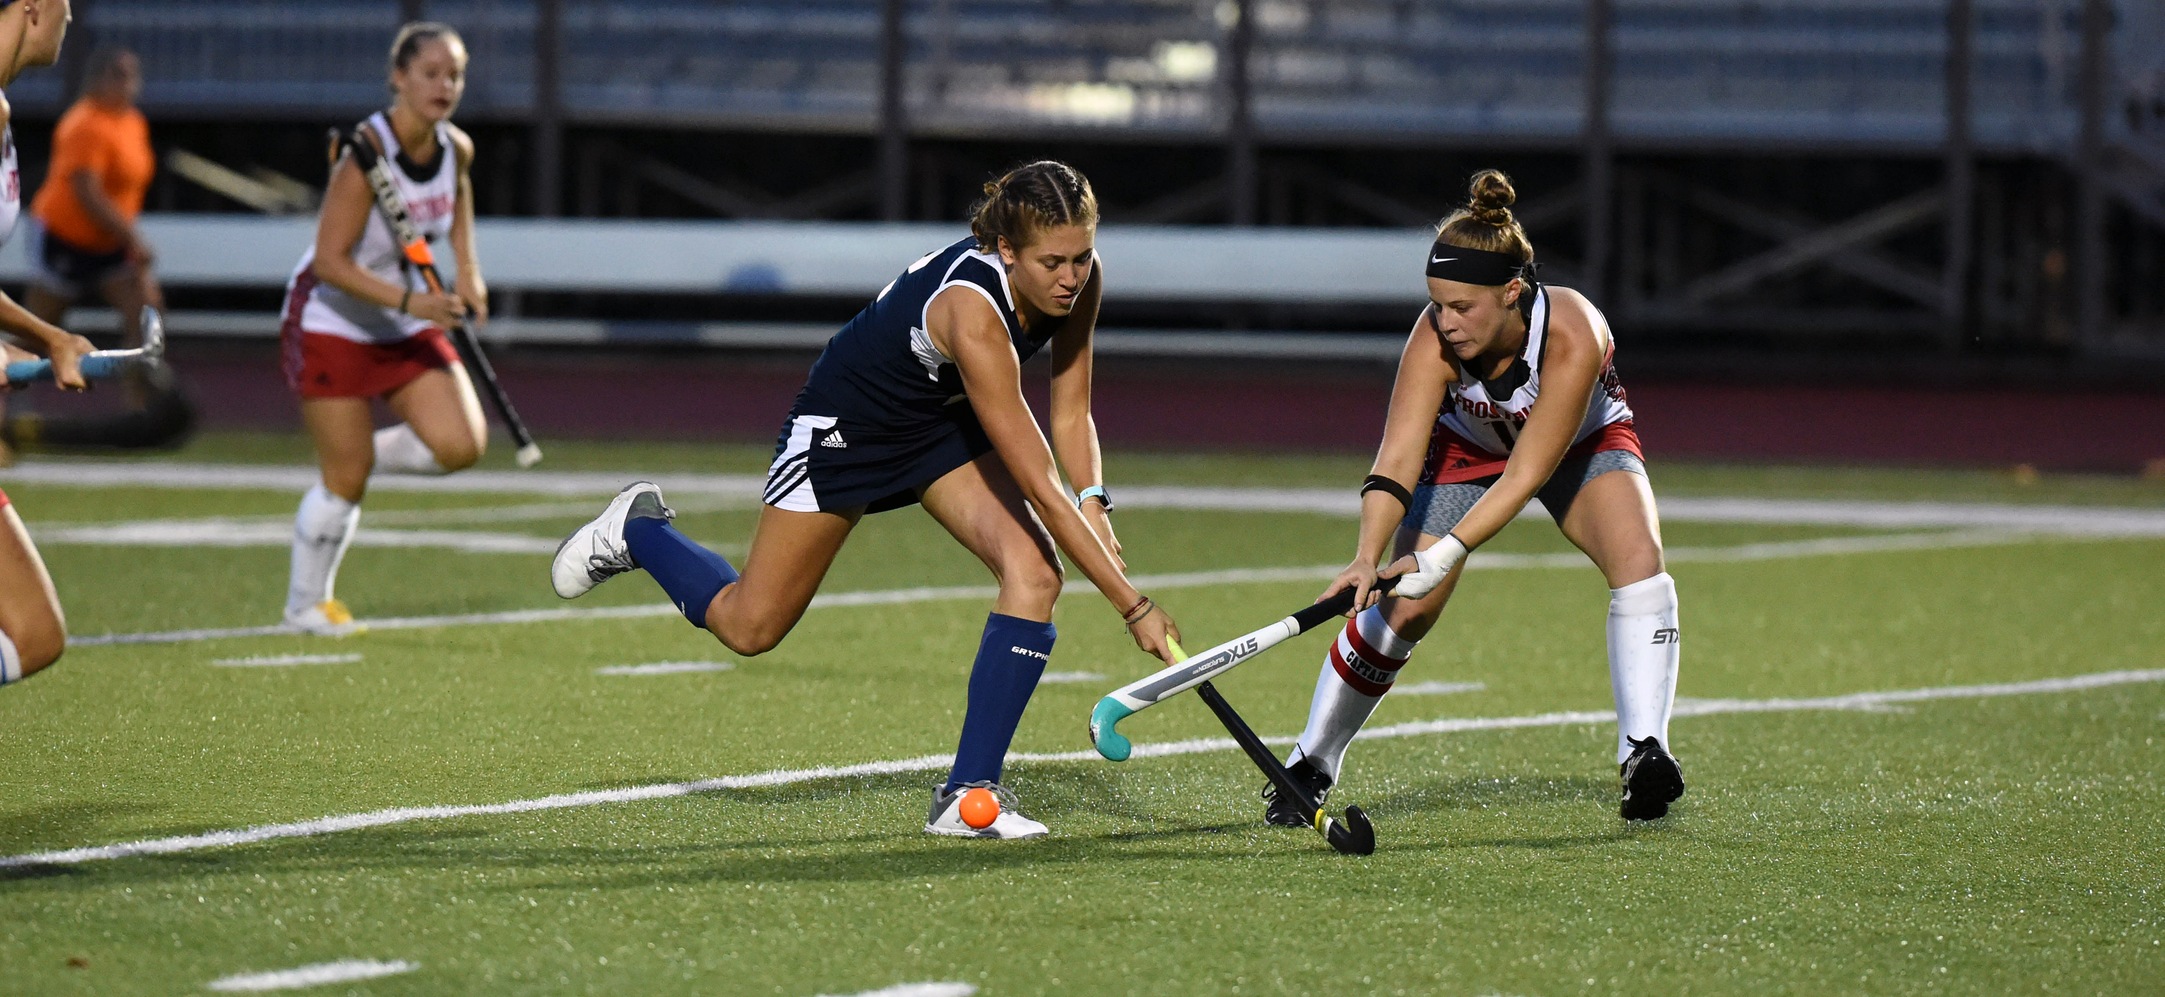 Field Hockey Drops First Game of the Season at Alvernia